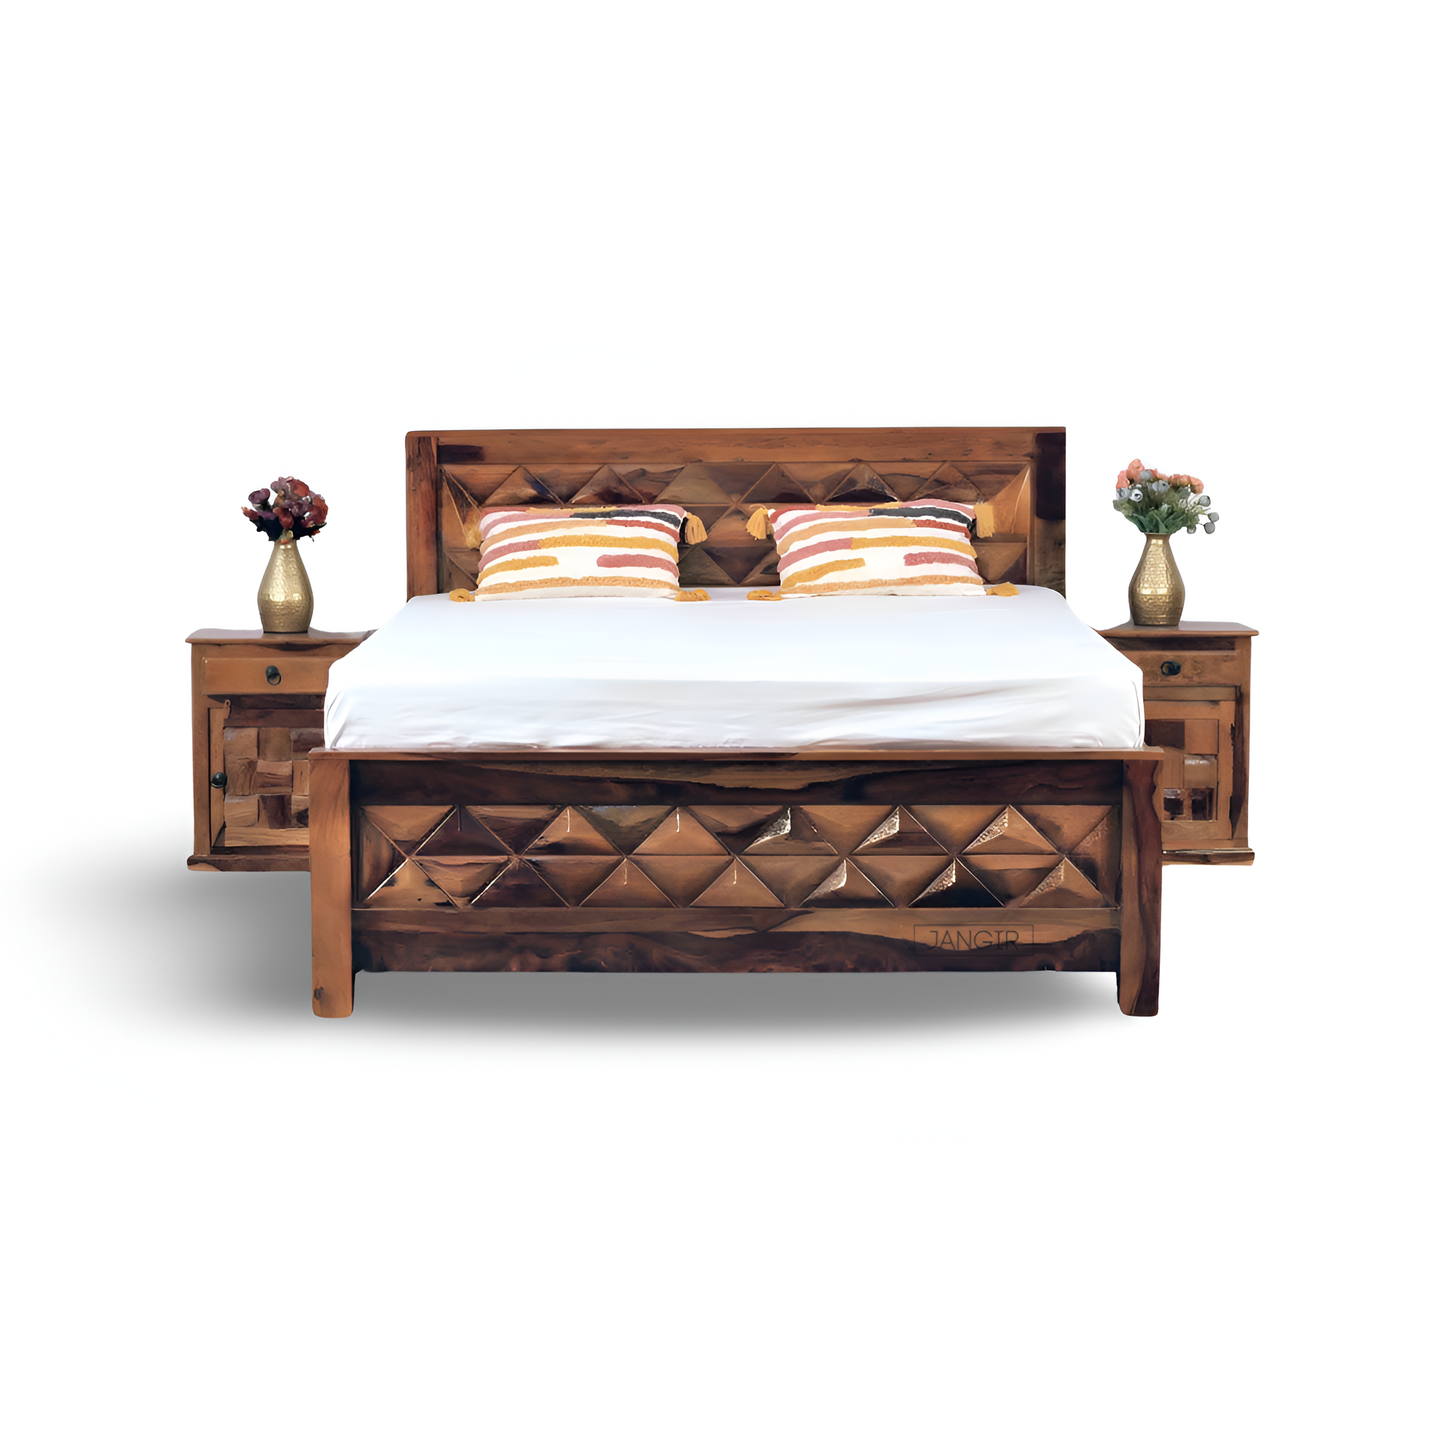 Discover our executive Triangle Pyramid Solid Wood Storage Bed, made from sheesham wood. Buy king and queen size double bed with storage near you in Bangalore!